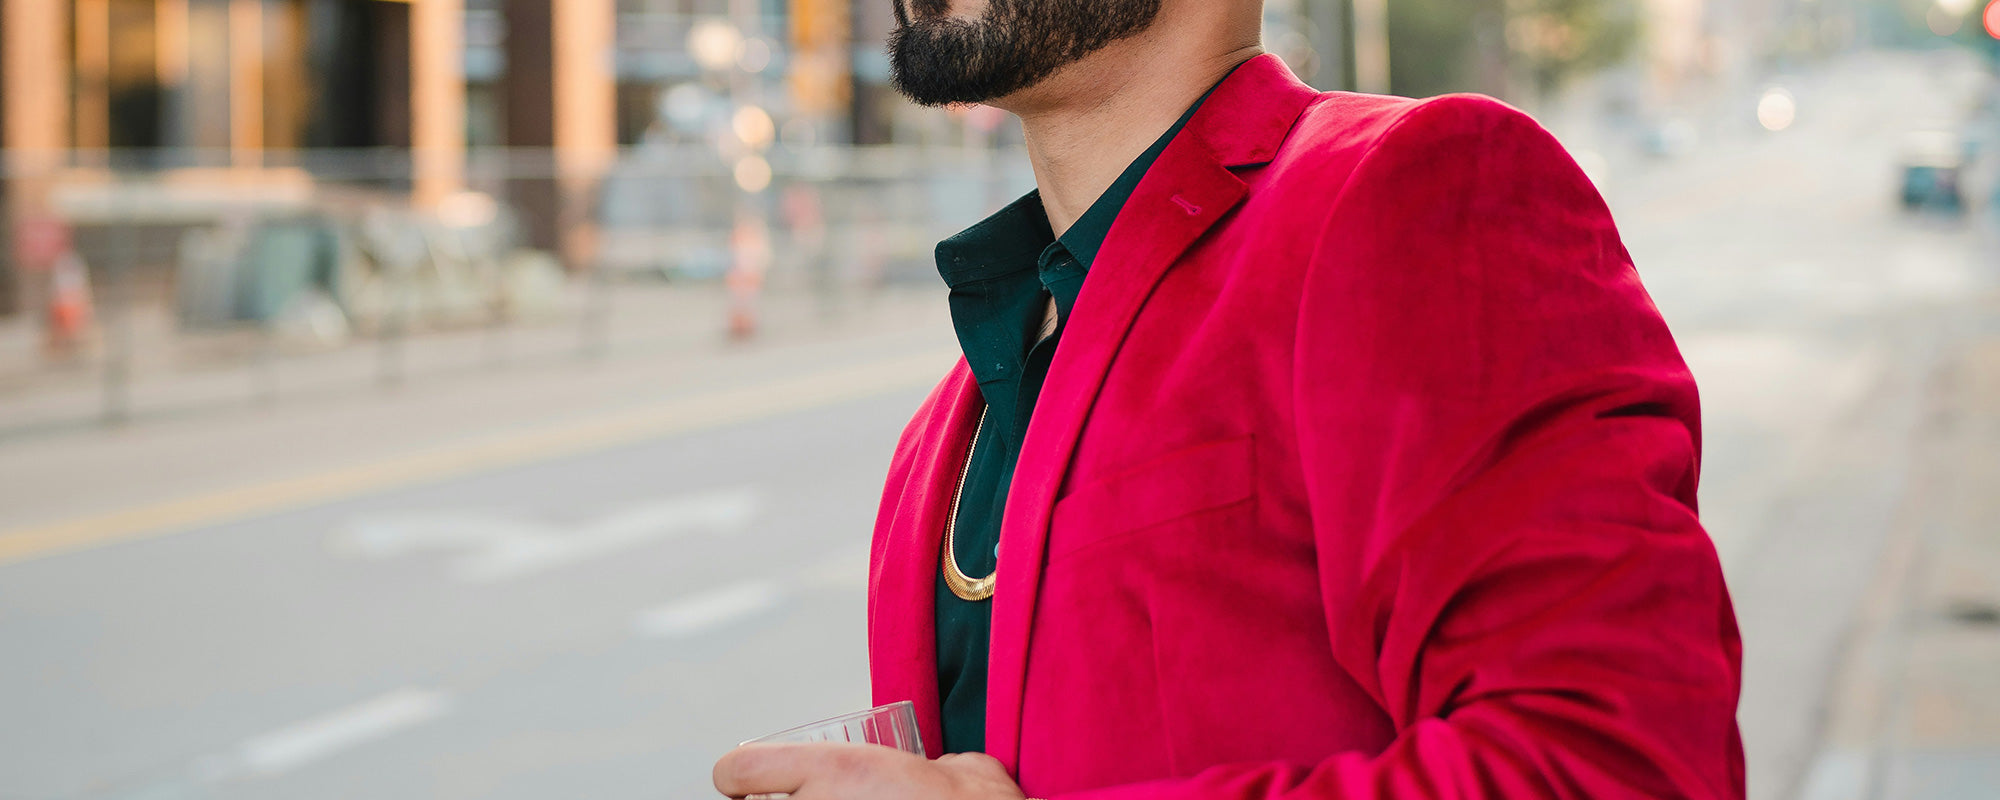 mens outfit hotpink suit dark green shirt and gold chain